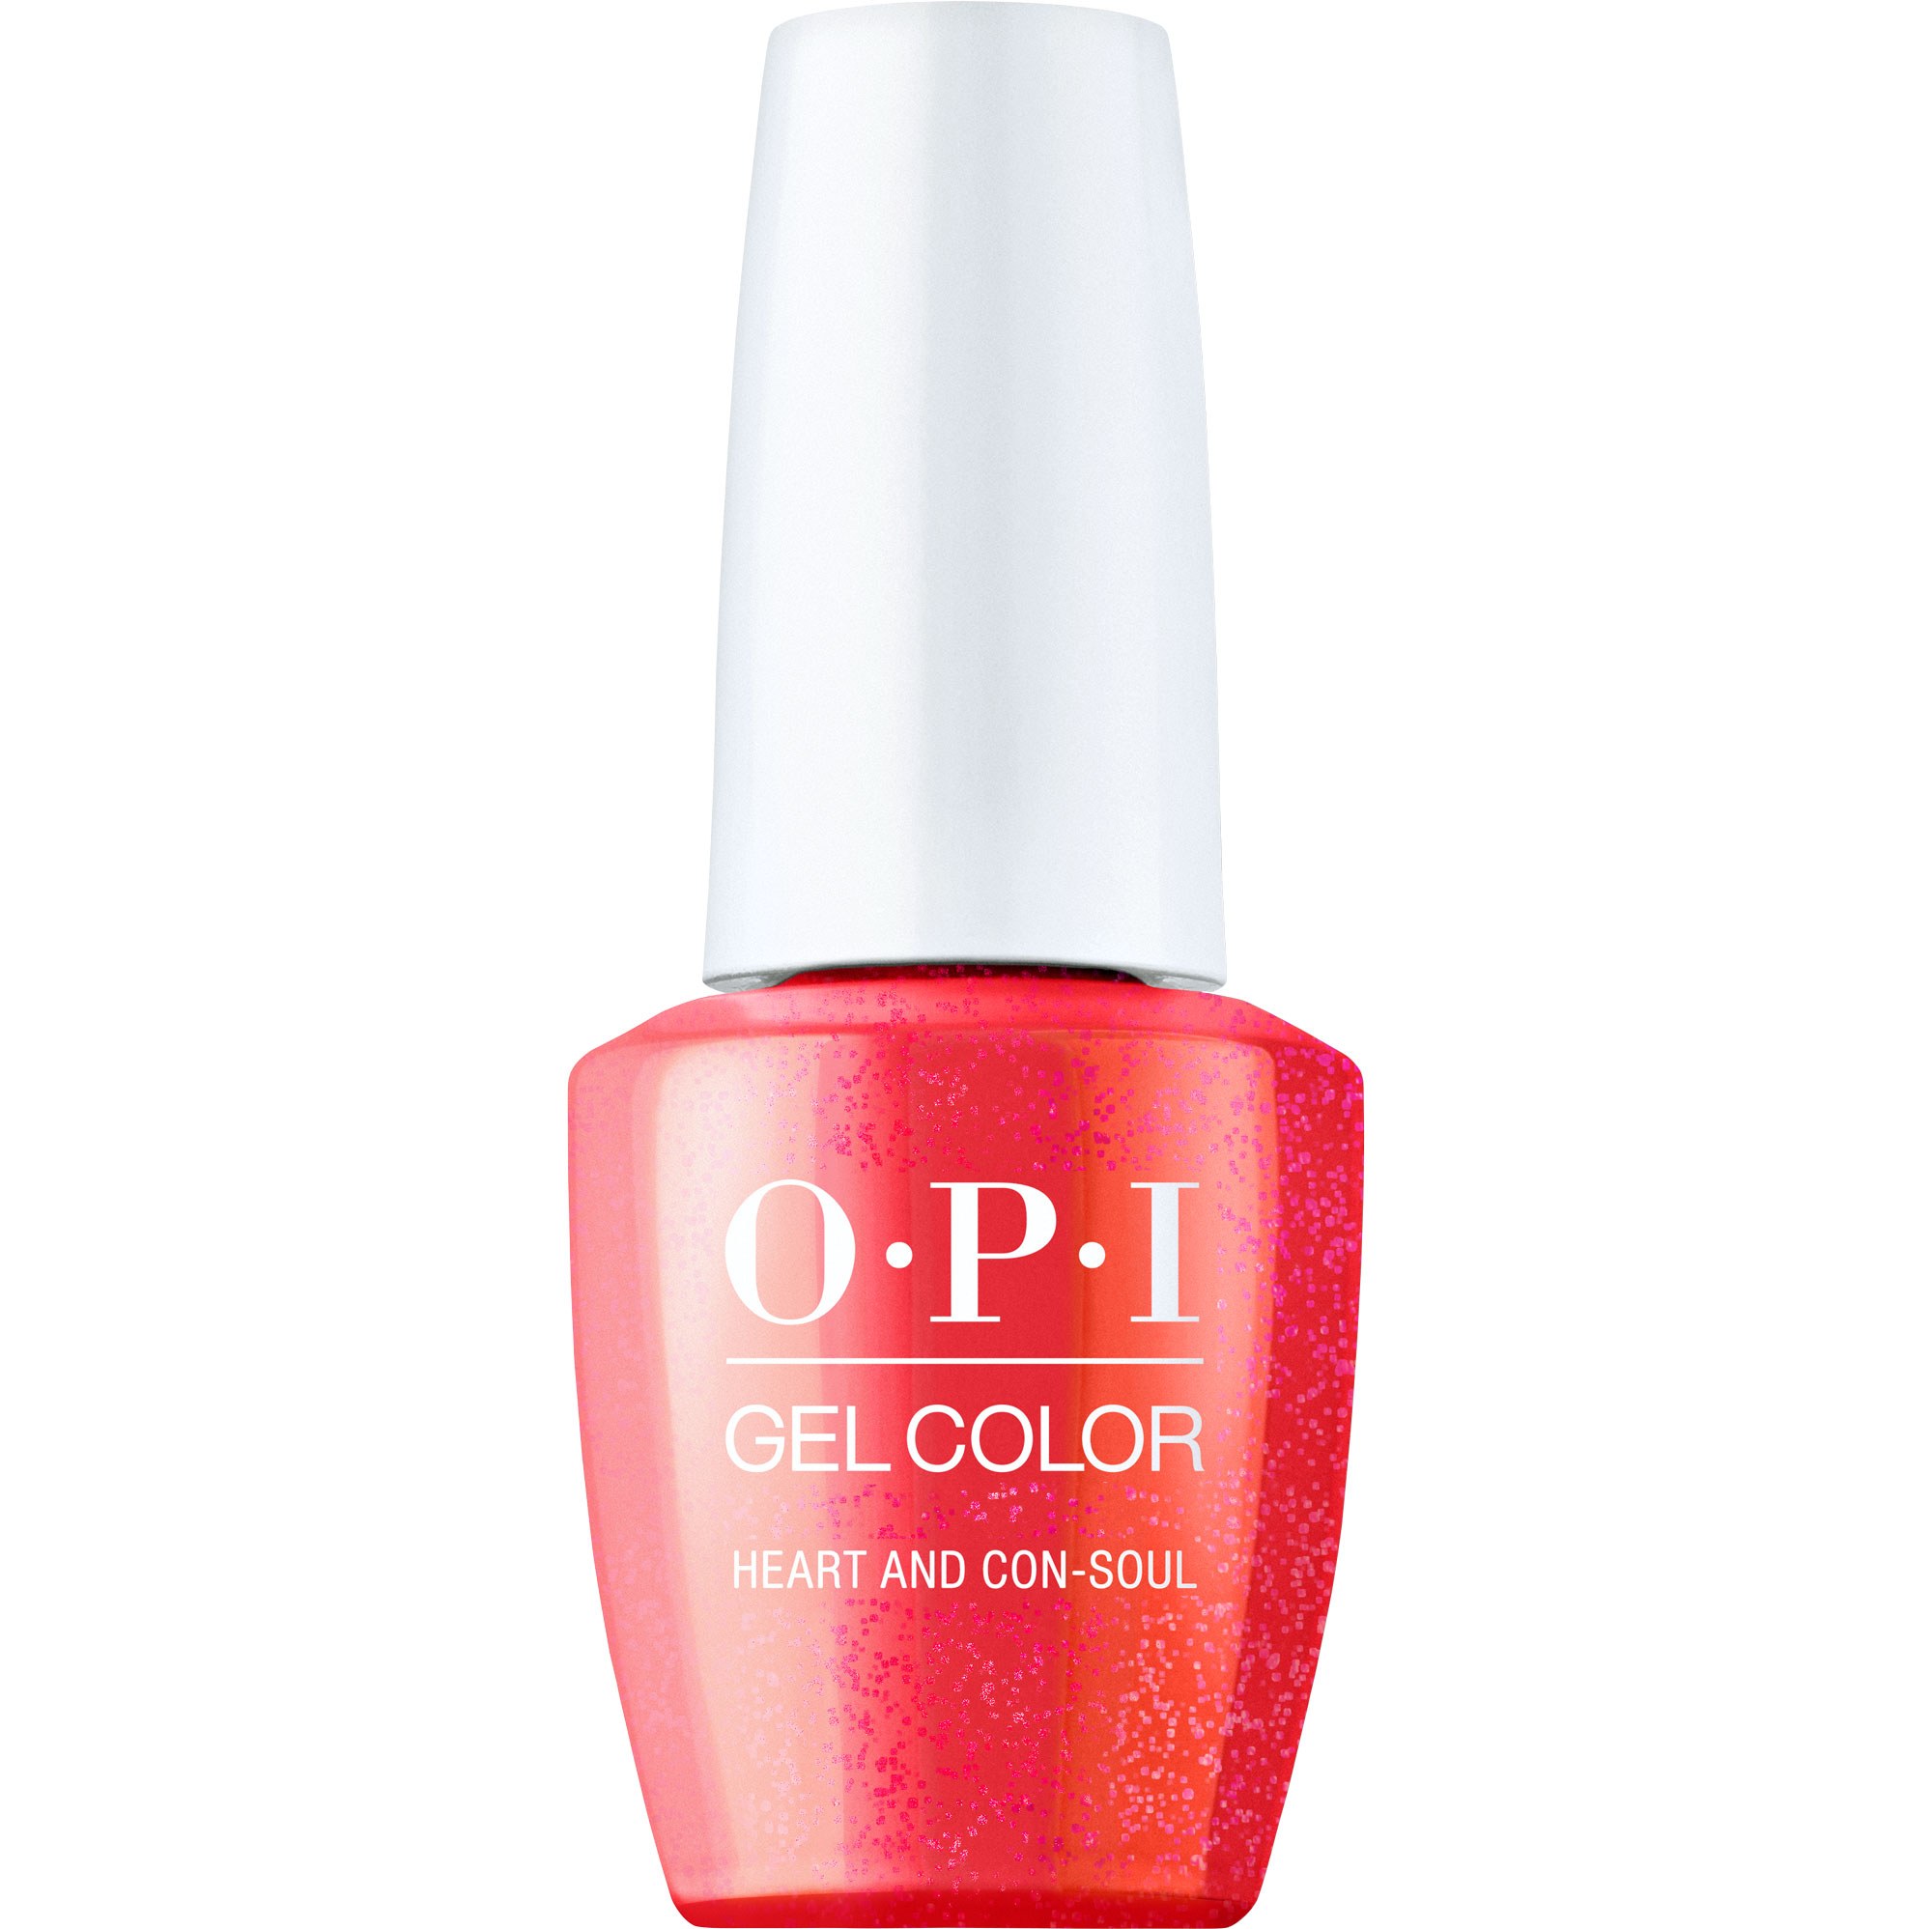 OPI GelColor 360 - Heart & Con-soul